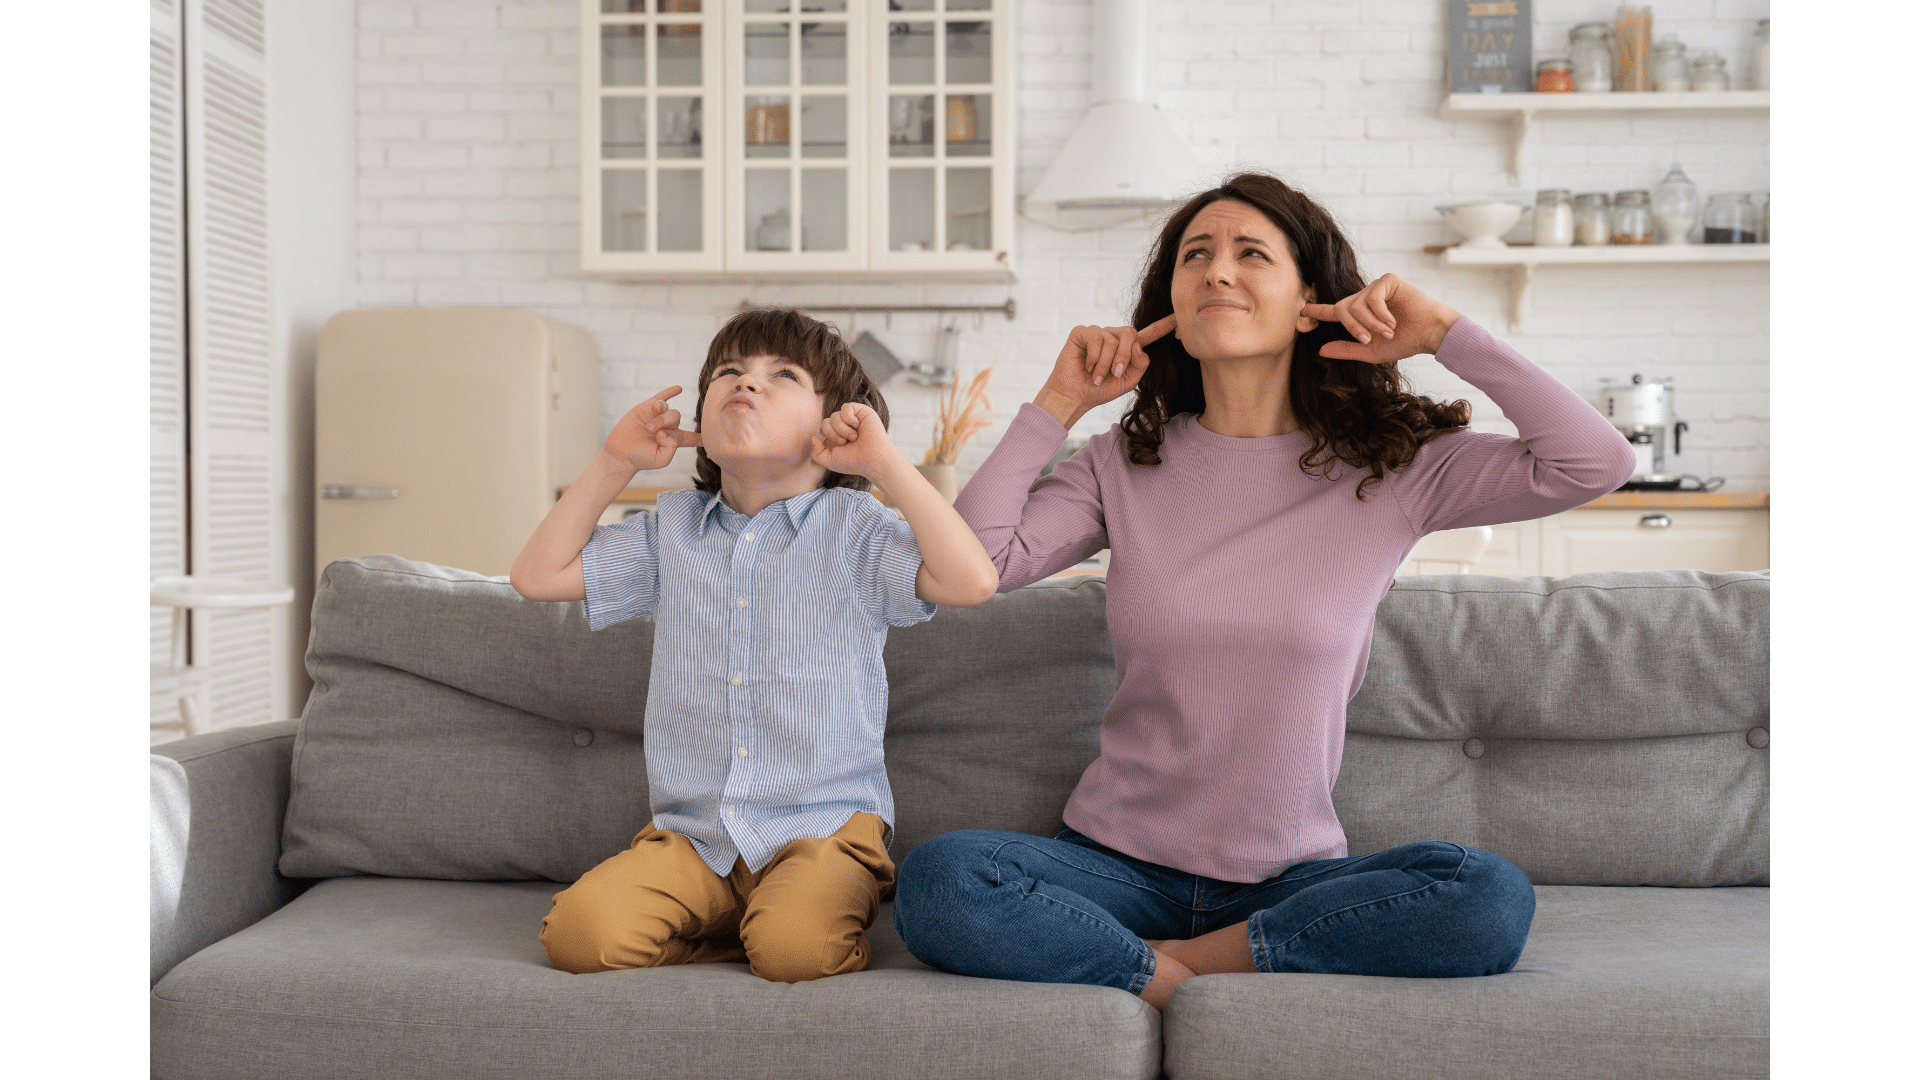 Frowning Mom and Son Sit on Couch with Closed Eyes and Plugged Ears from Upstairs Noise